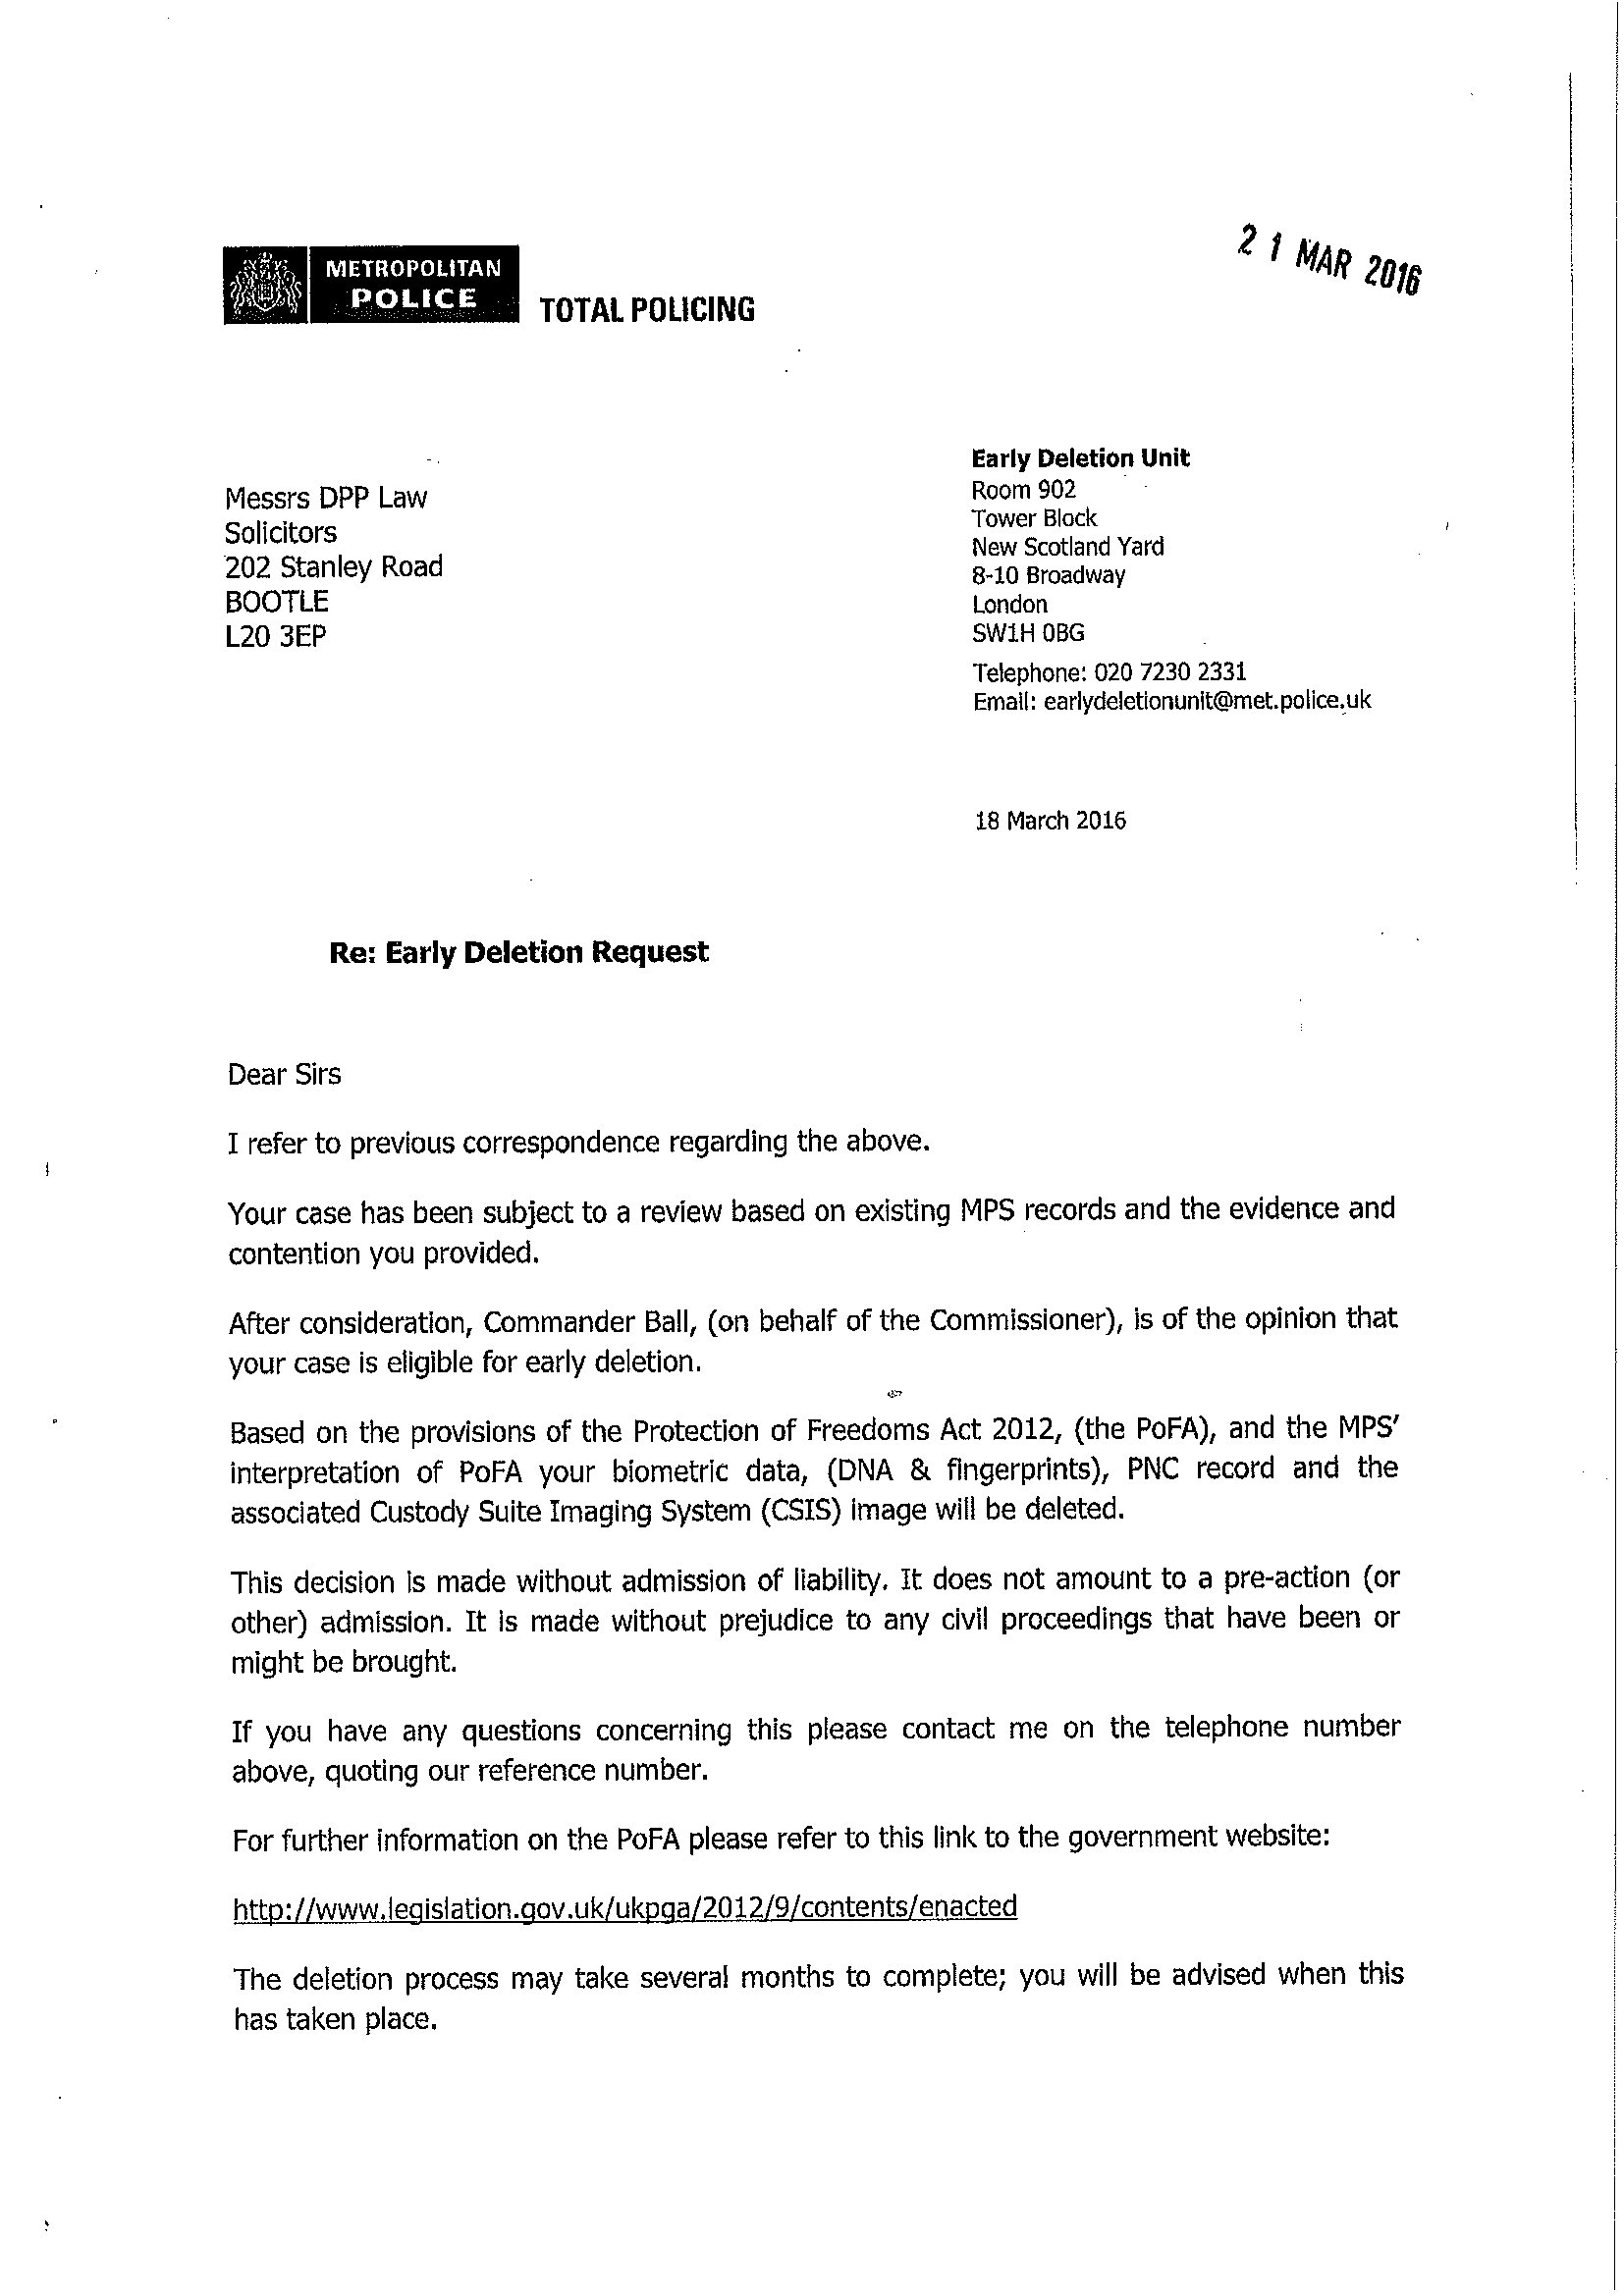 The Metropolitan Police wrote this letter to solicitor Iain Gould about deletion of records from their police systems.